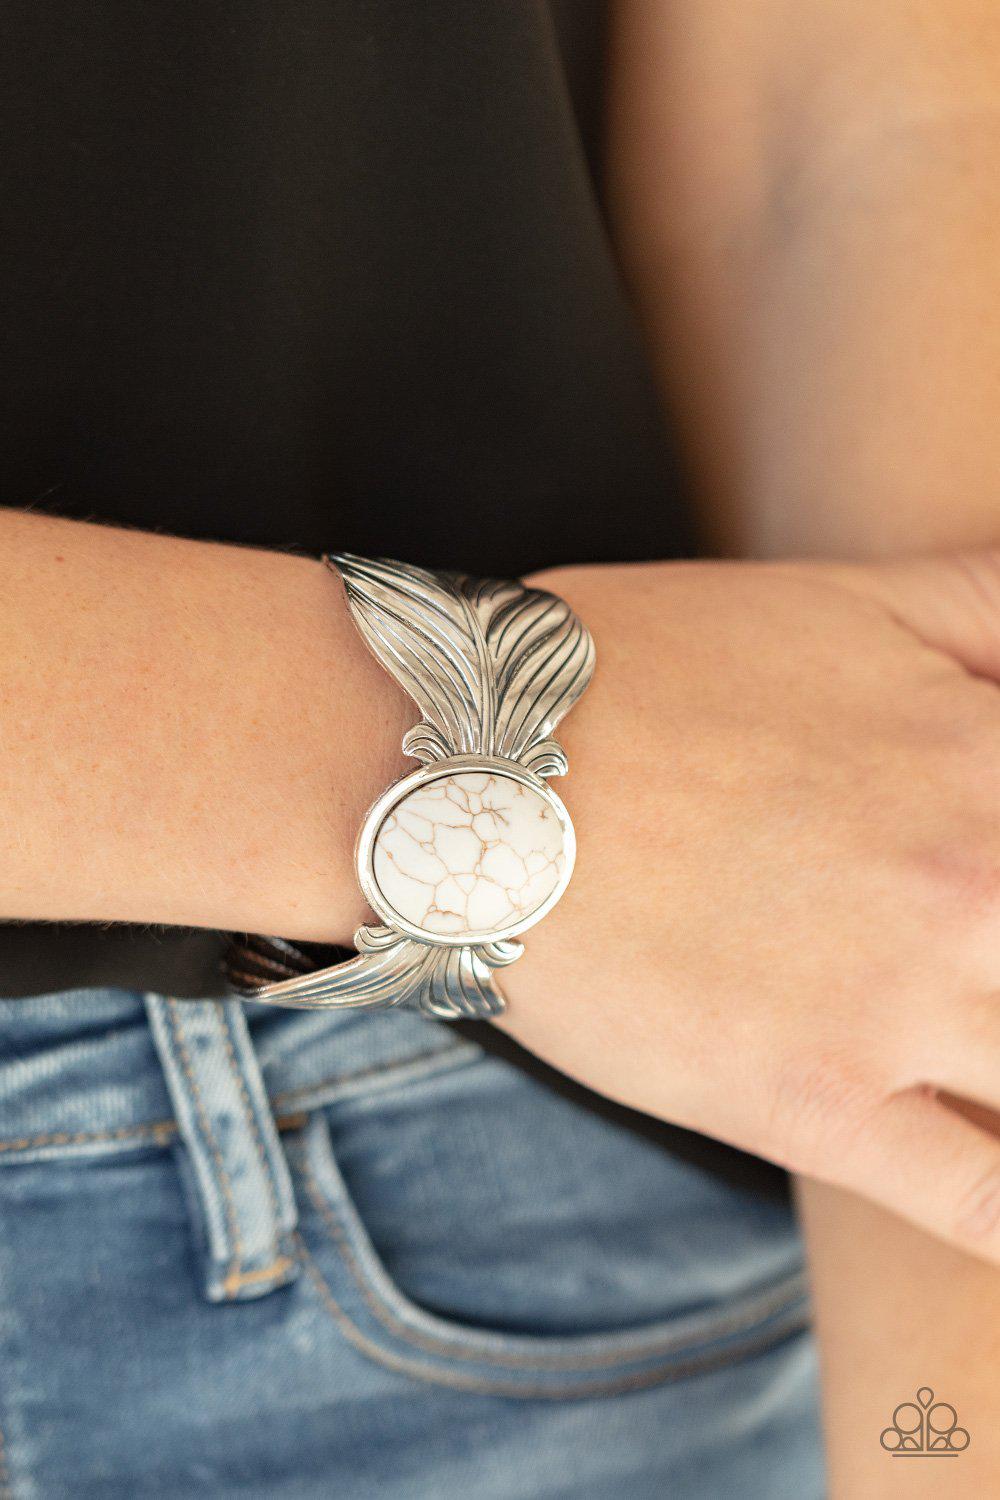 Born to Soar White Stone and Silver Feather Cuff Bracelet - Paparazzi Accessories- lightbox - CarasShop.com - $5 Jewelry by Cara Jewels